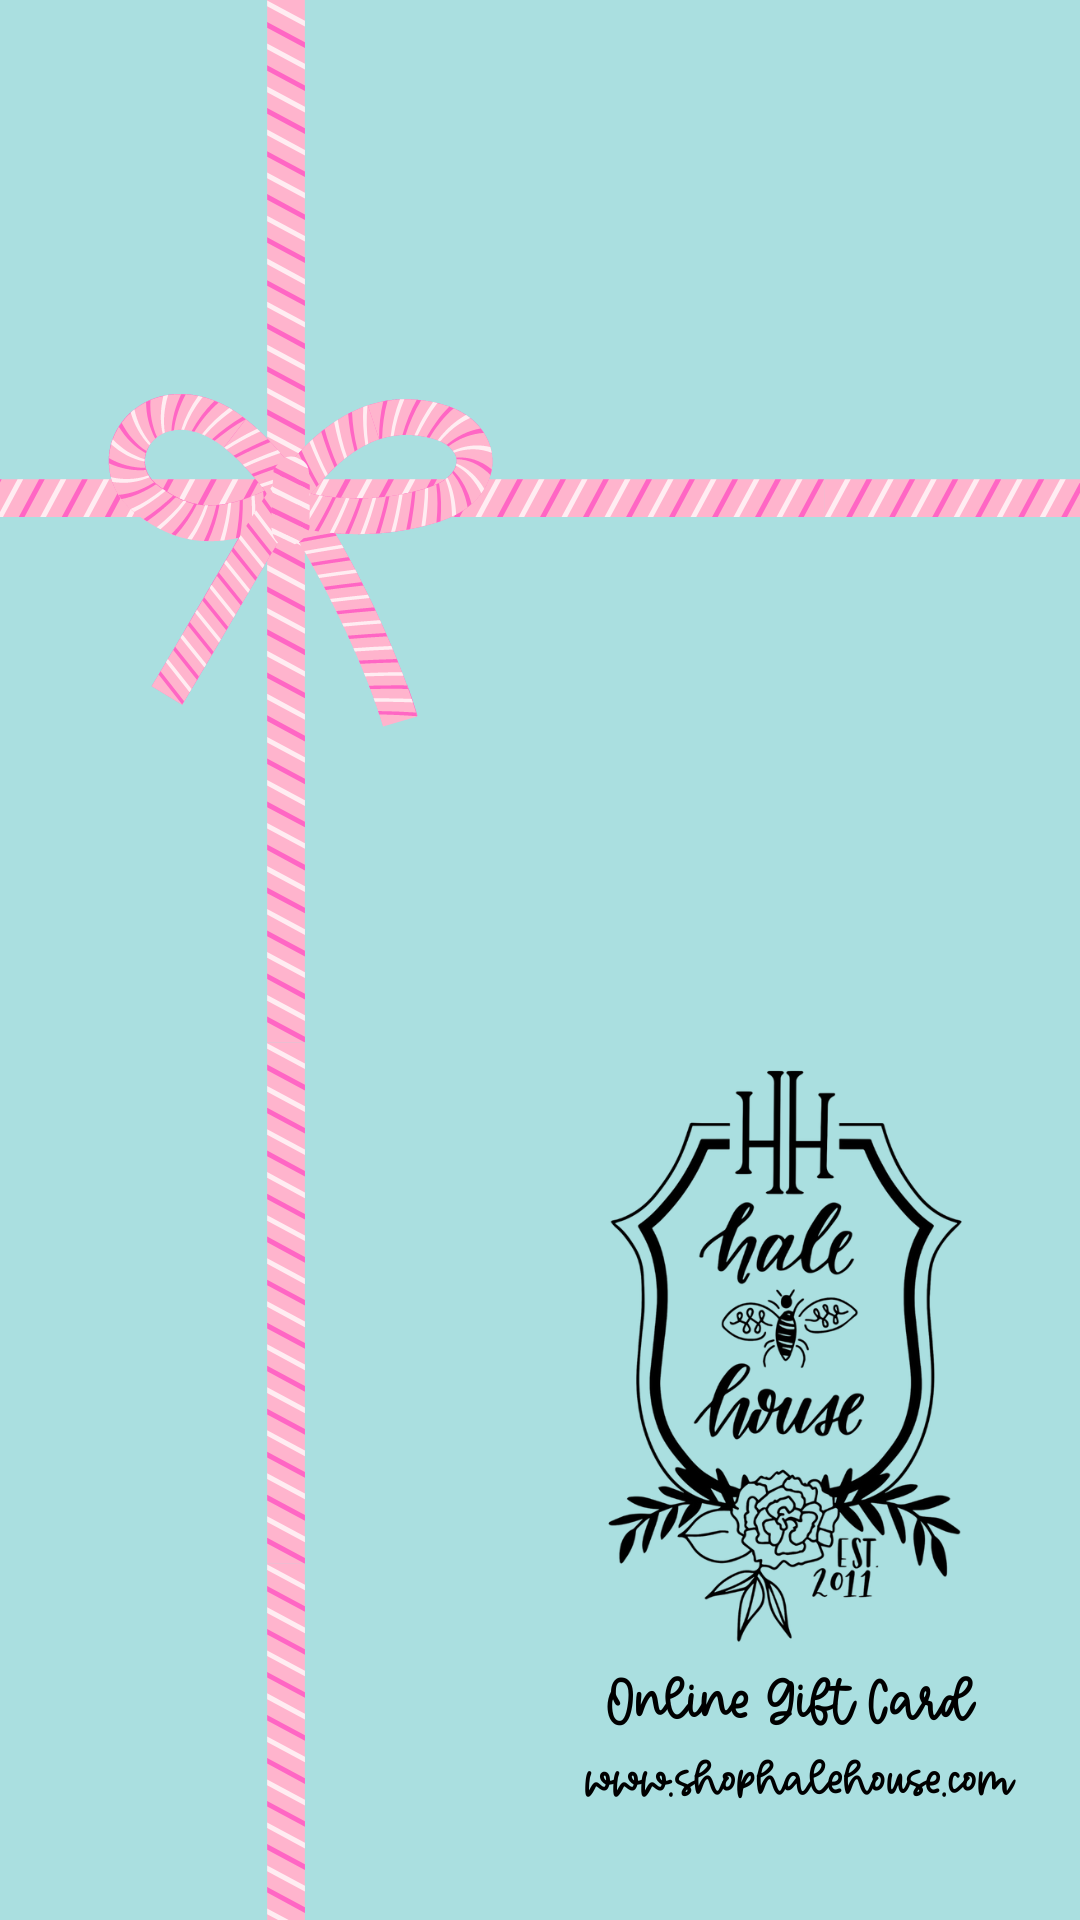 Hale House Online Gift Card